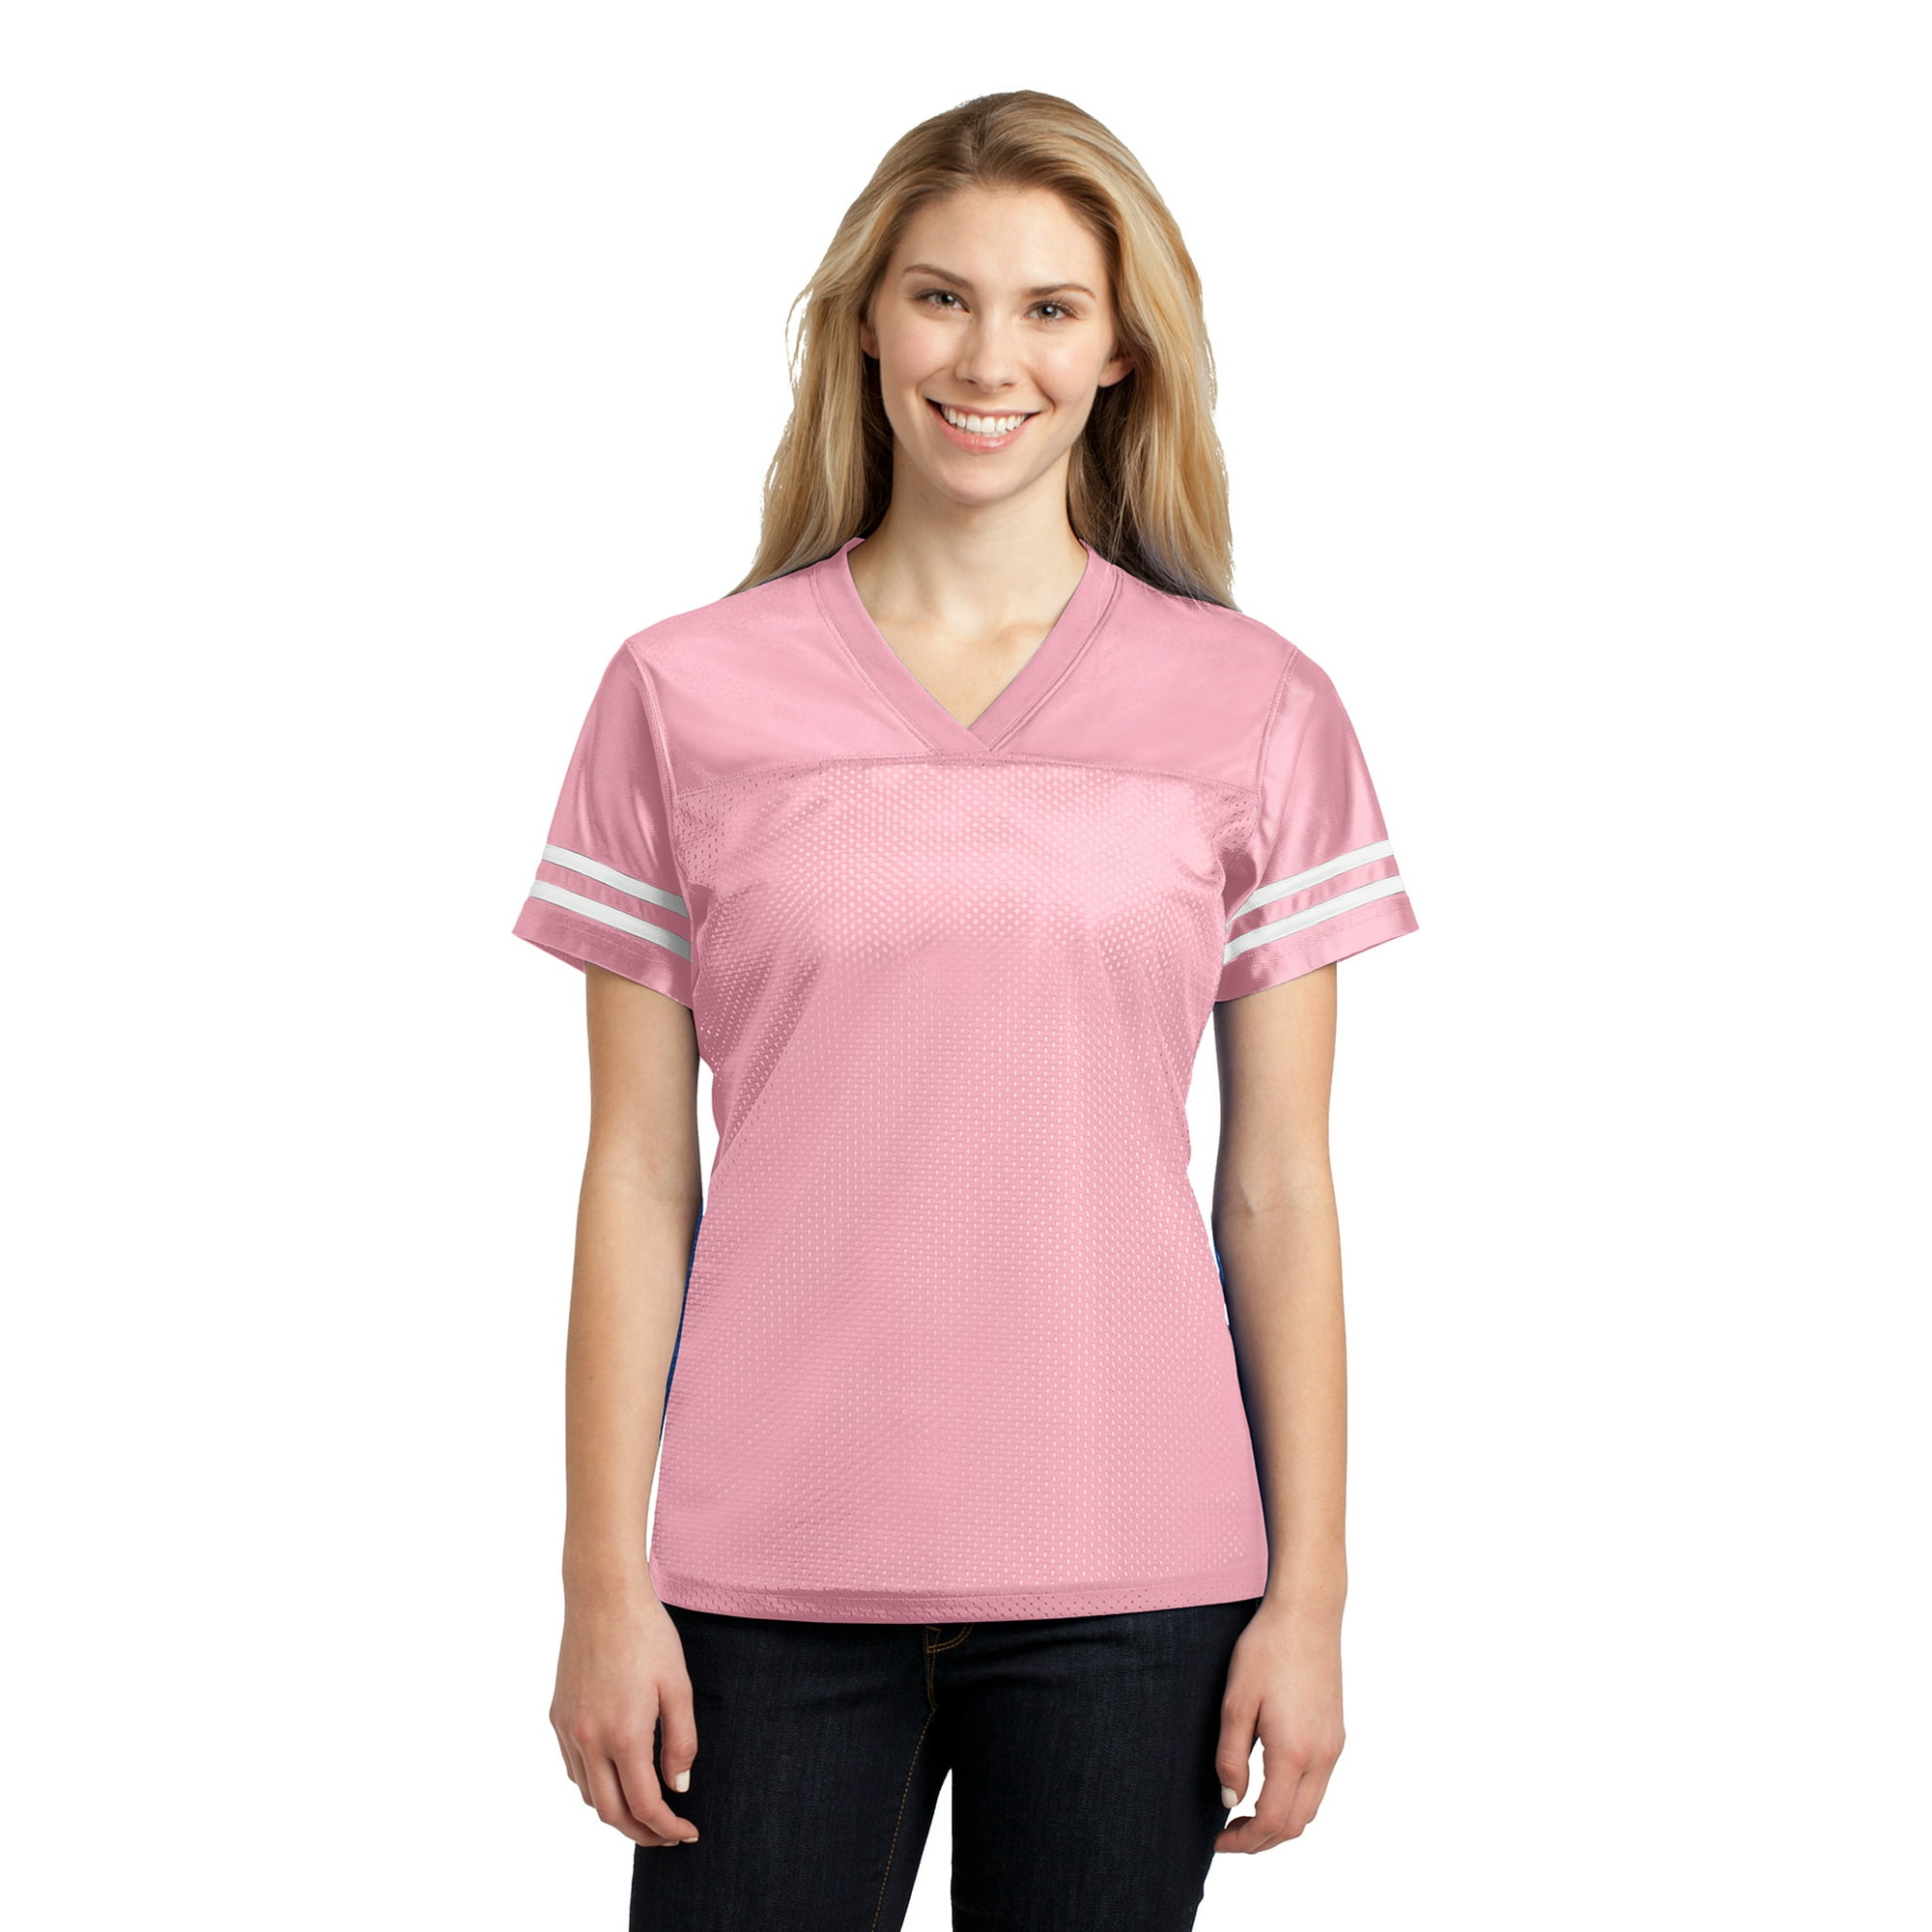 Ladies Football Replica Jersey Color Light Pink/White X-Small Size 